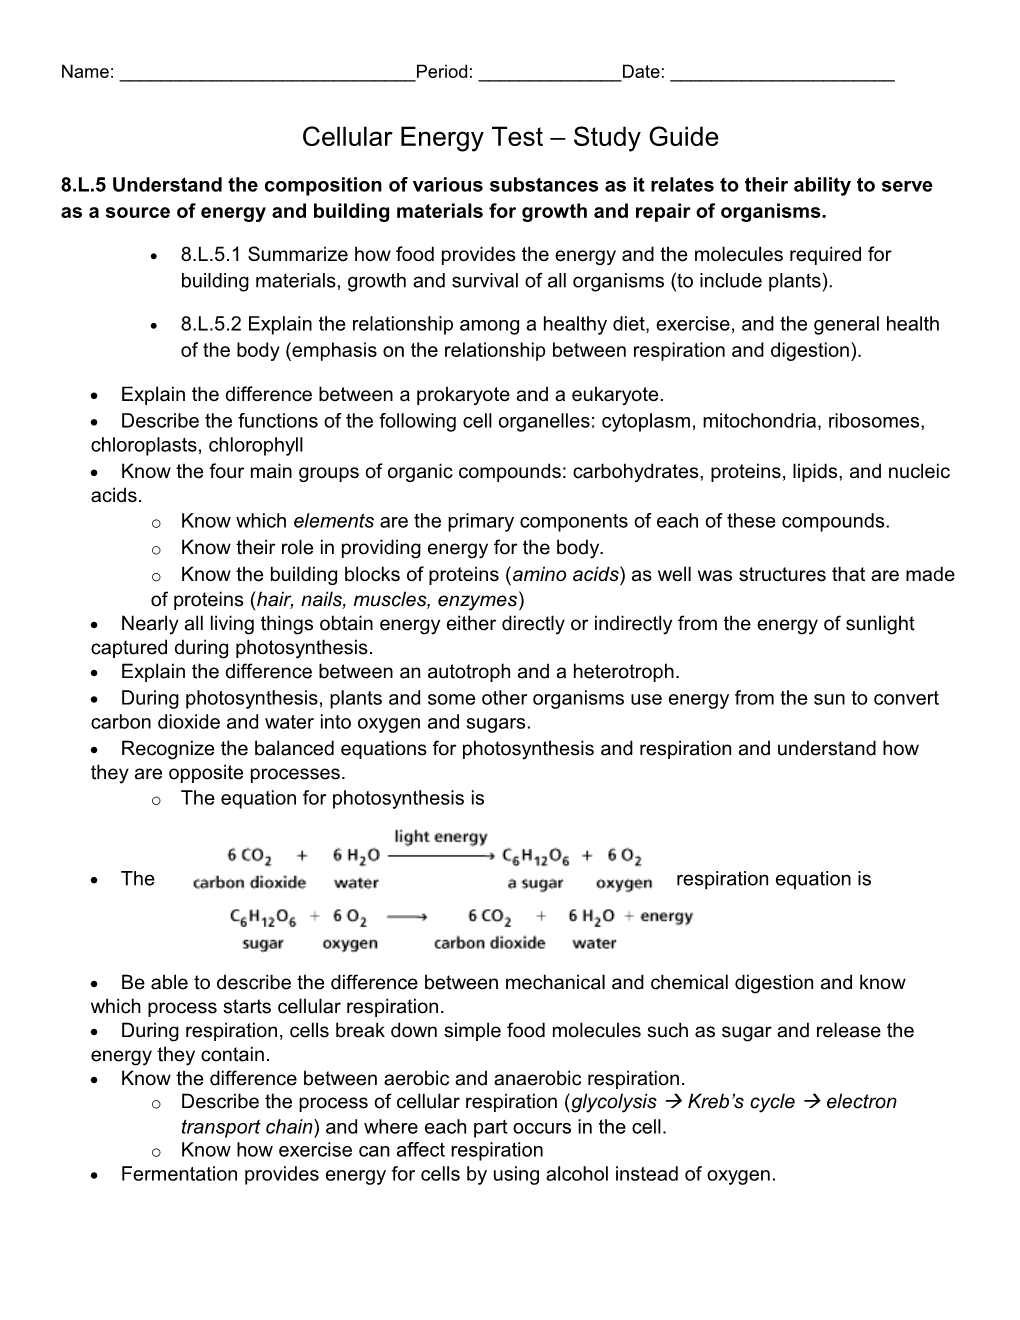 Cellular Energy Test Study Guide